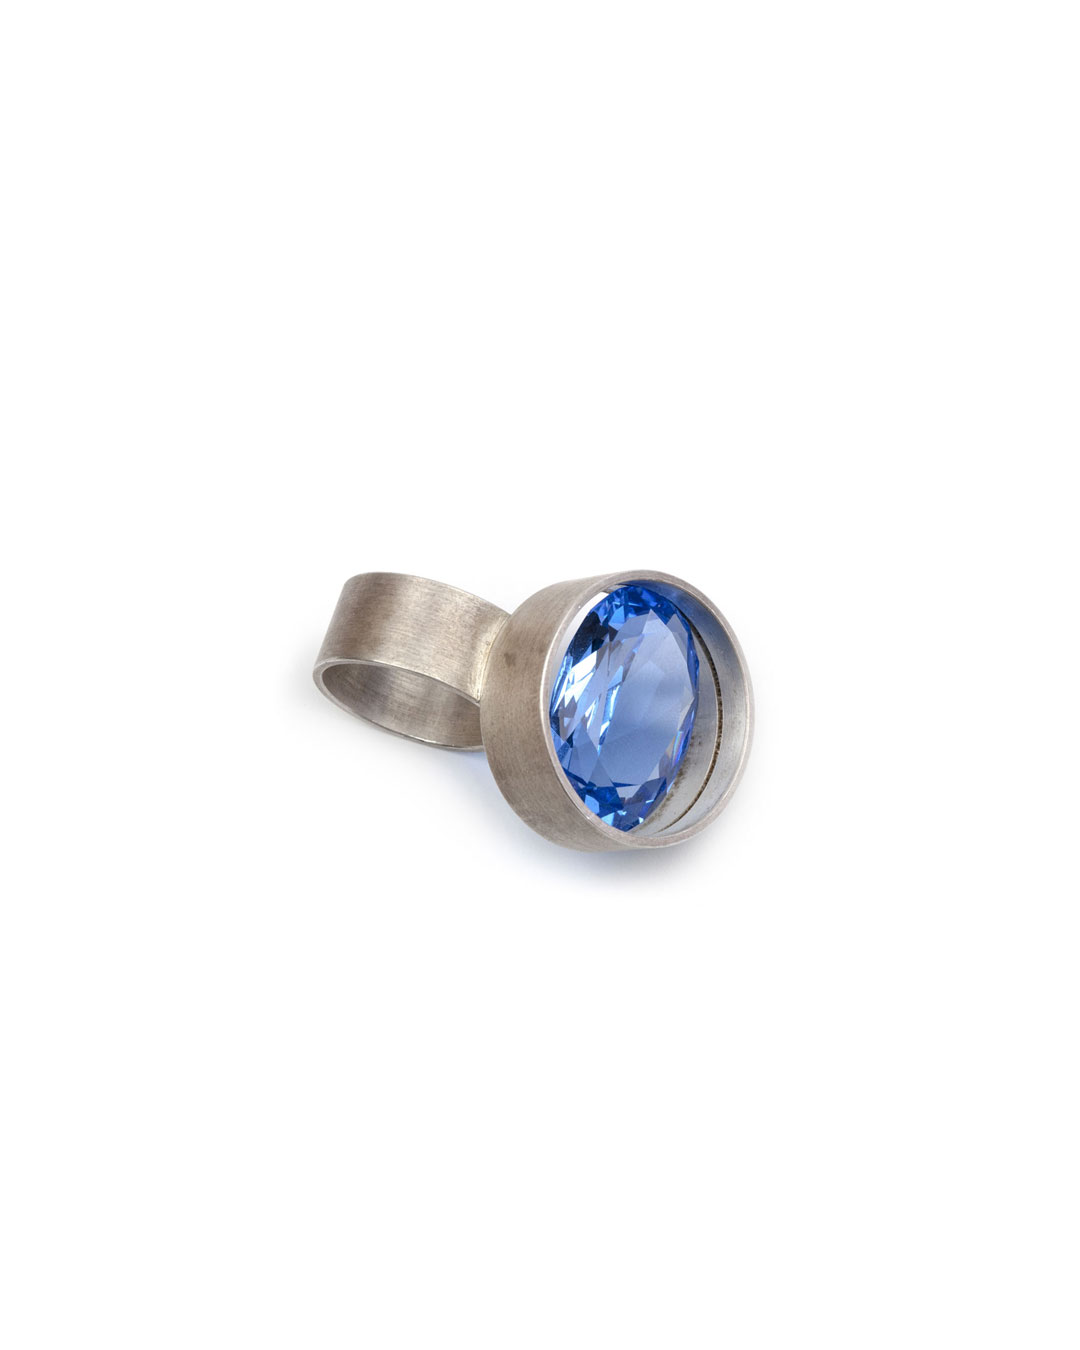 Herman Hermsen, untitled, 2000, ring; silver, synthetic stone, 29 x 25 x 33 mm, €295